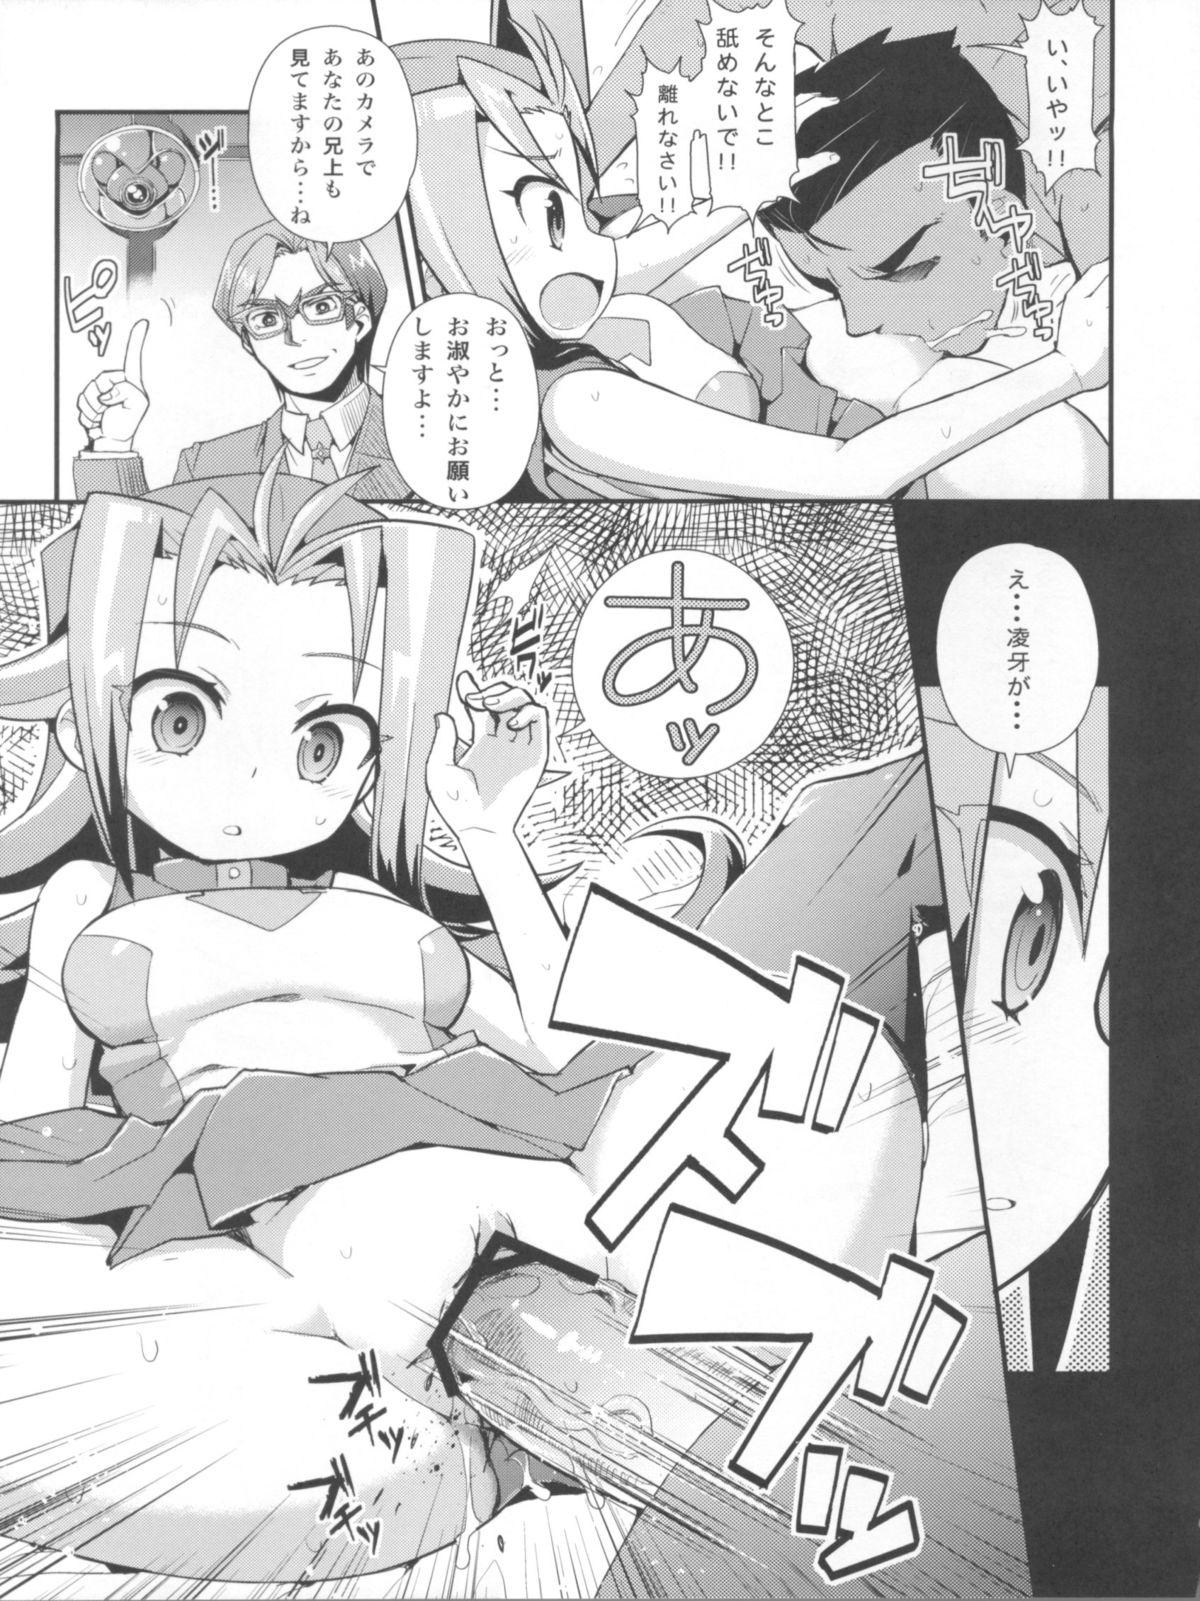 Livecams Carnival! - Yu-gi-oh zexal Nice Tits - Page 9